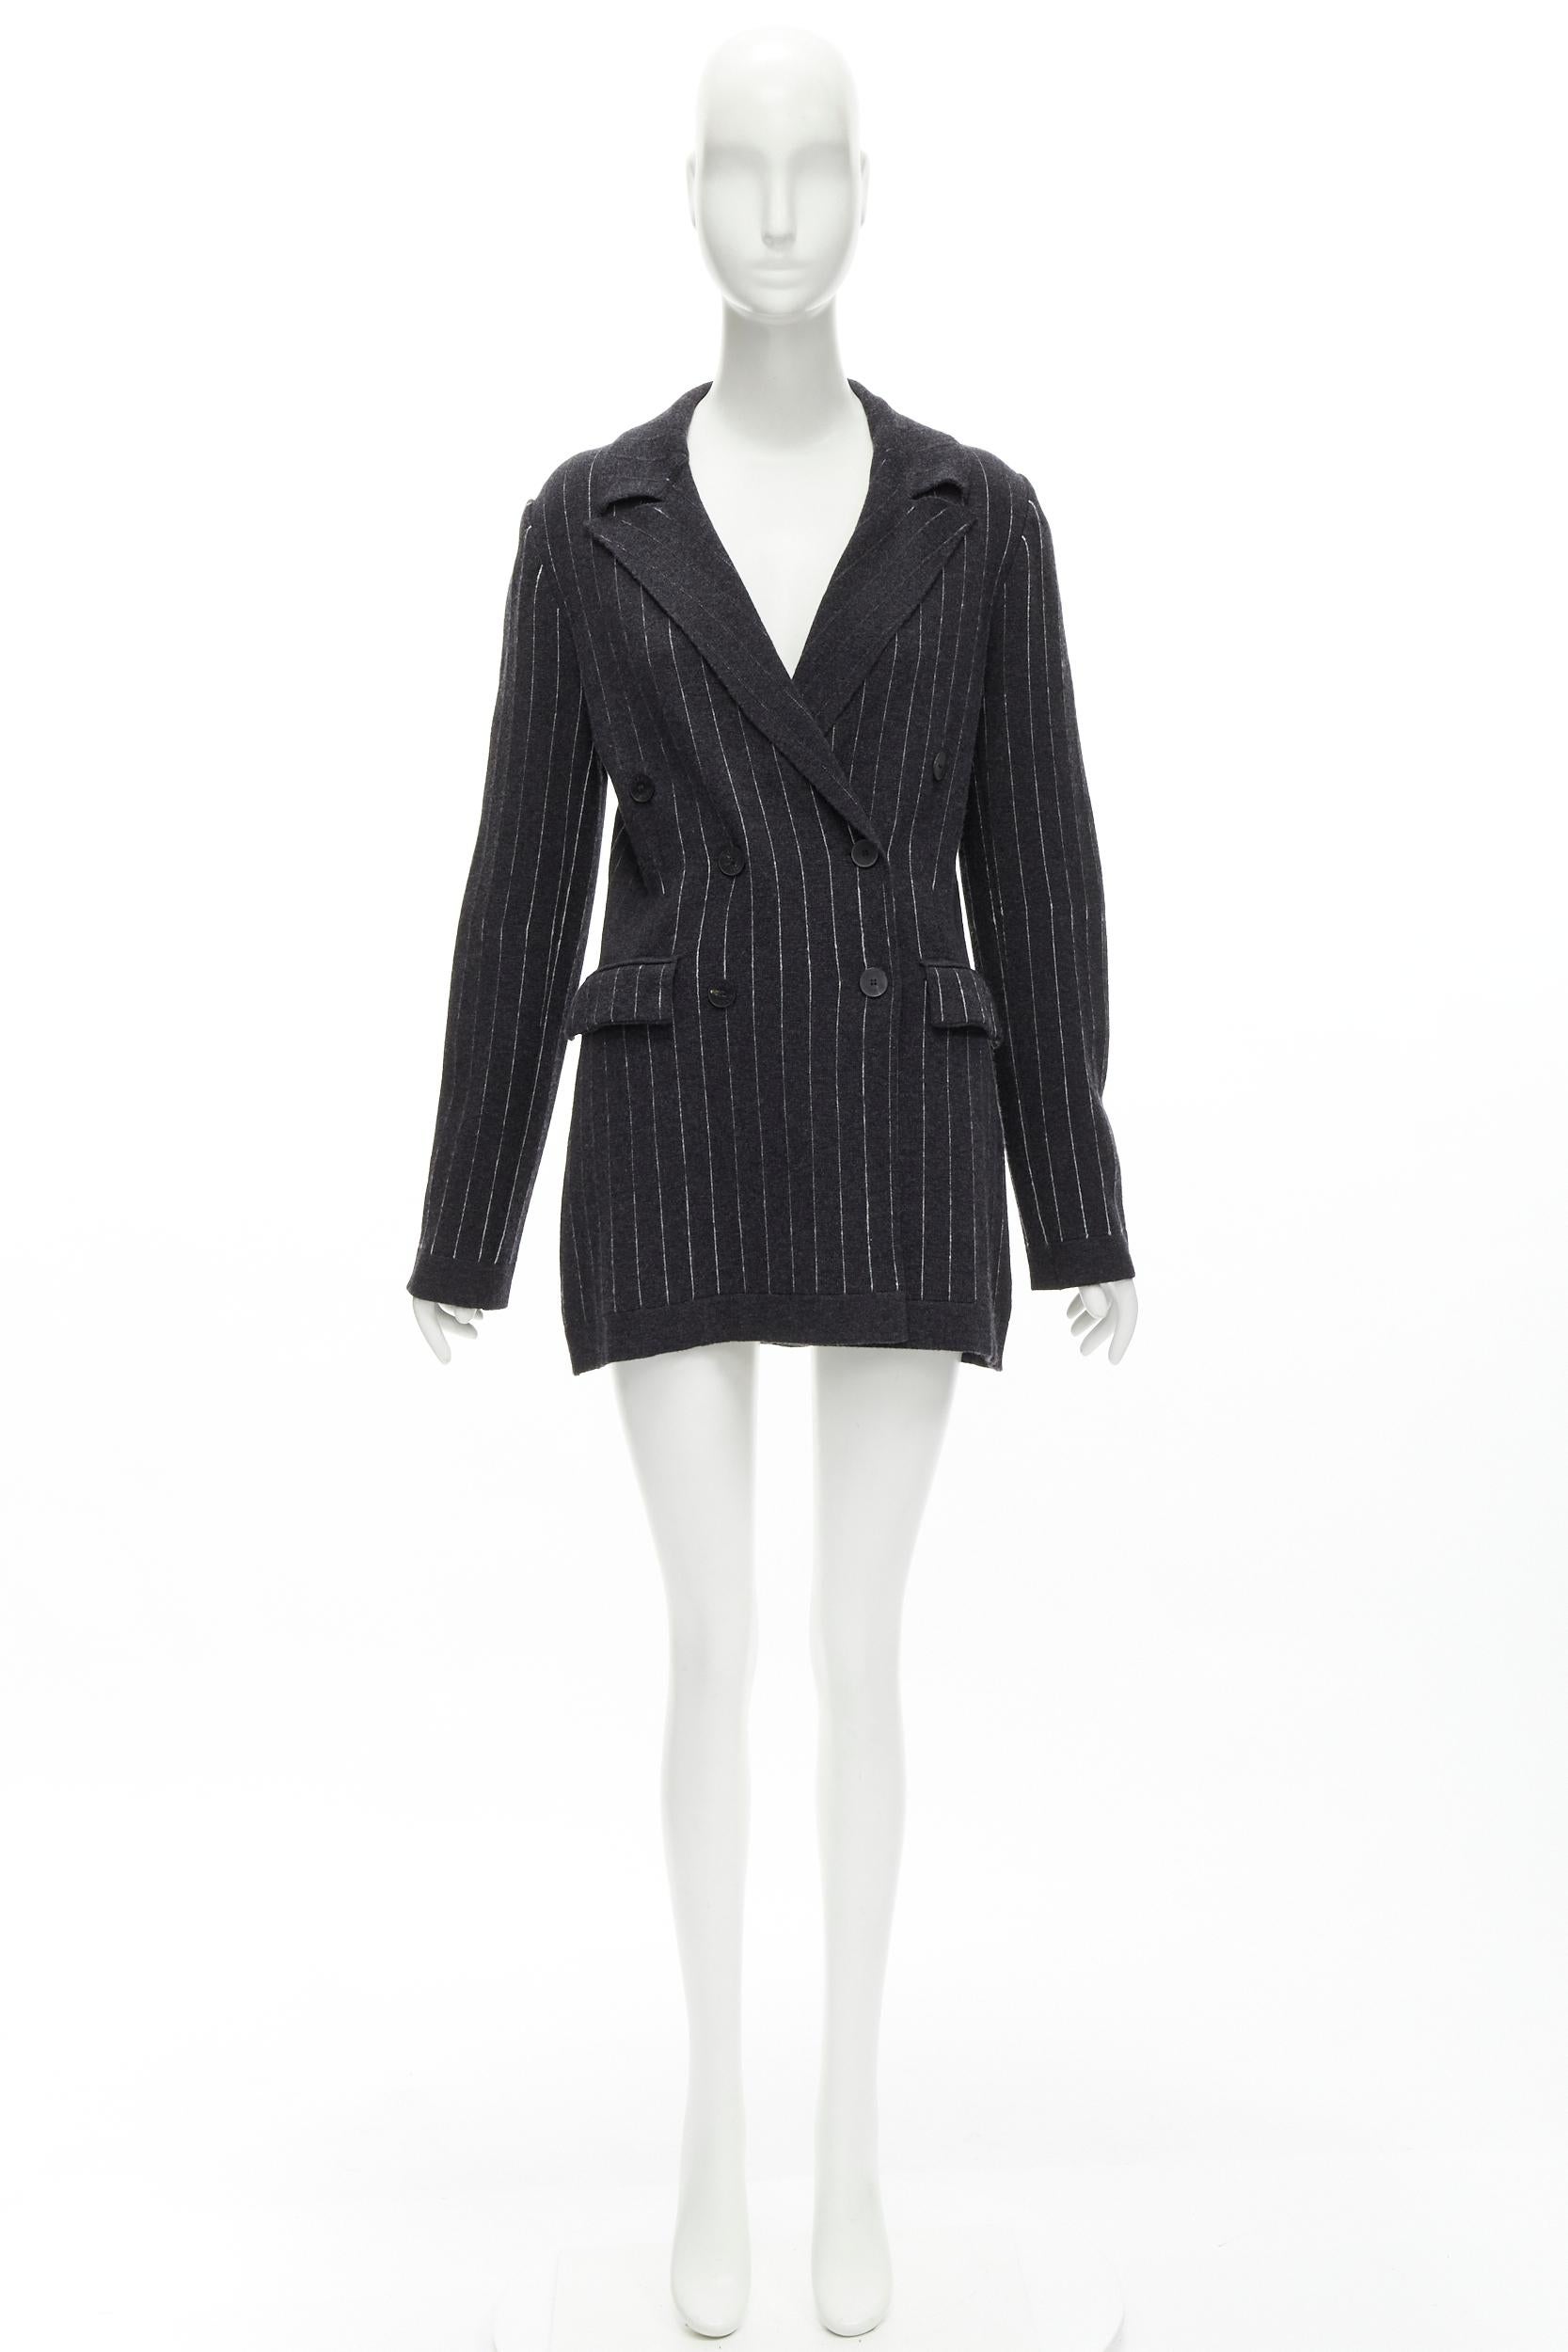 BARRIE 100% pure cashmere dark grey pinstriped double breasted blazer cardigan S For Sale 5